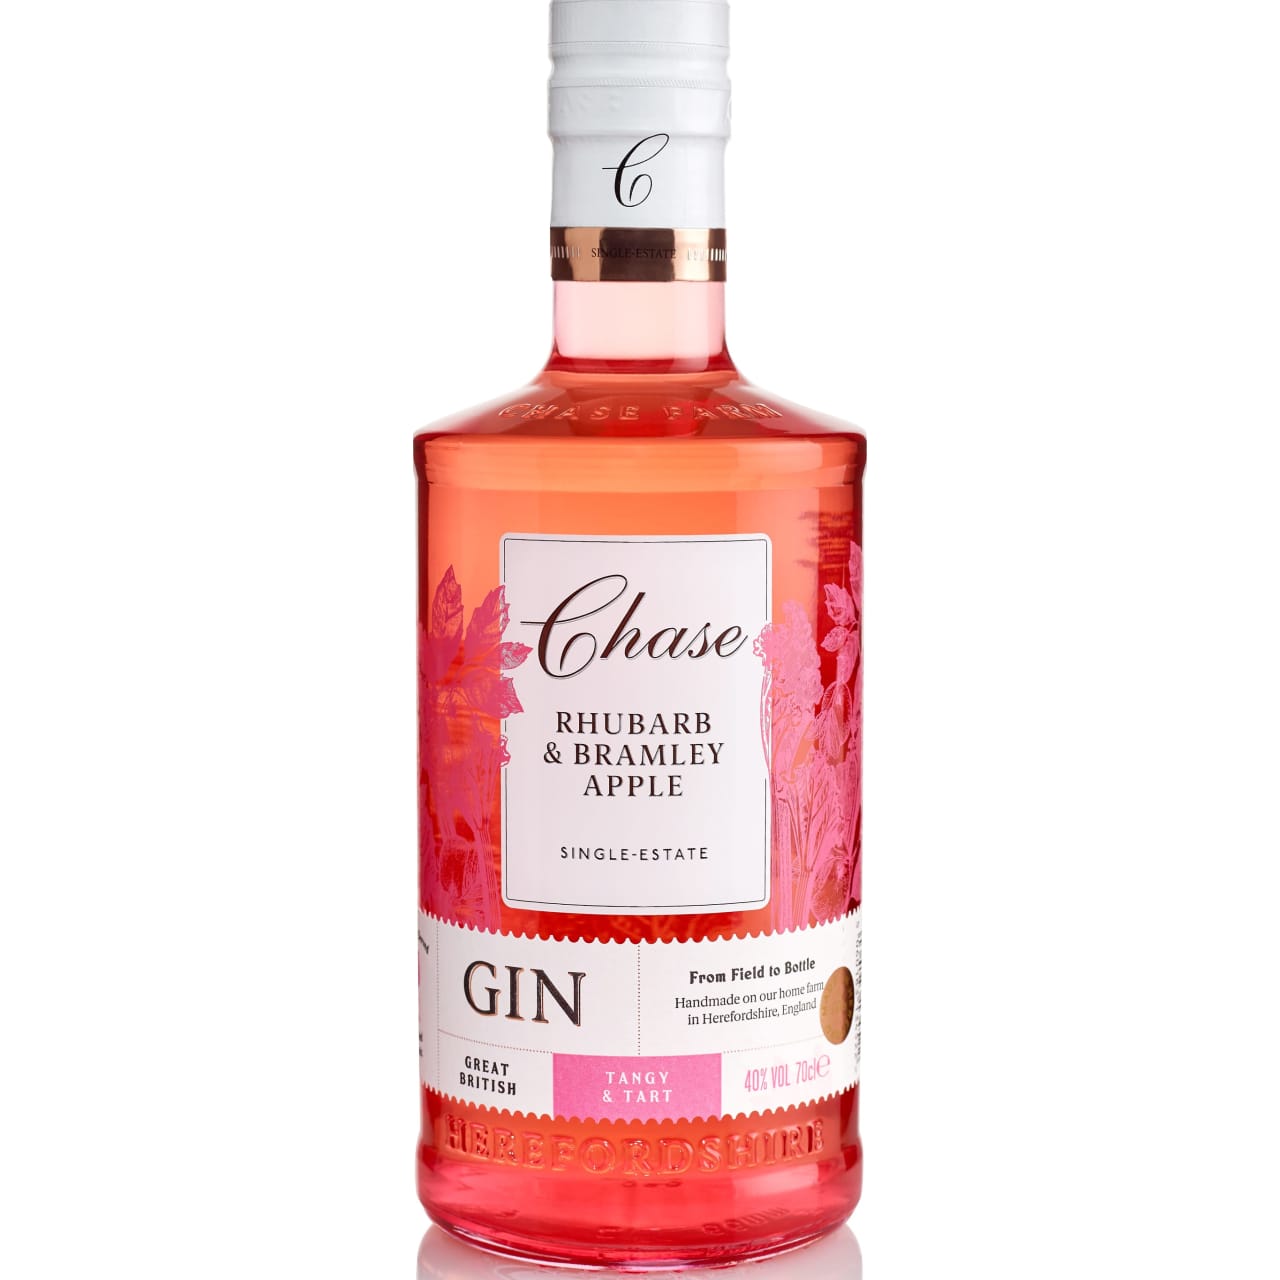 This tangy and tart gin is a perfect blend of fresh rhubarb, Bramley apple and juniper.